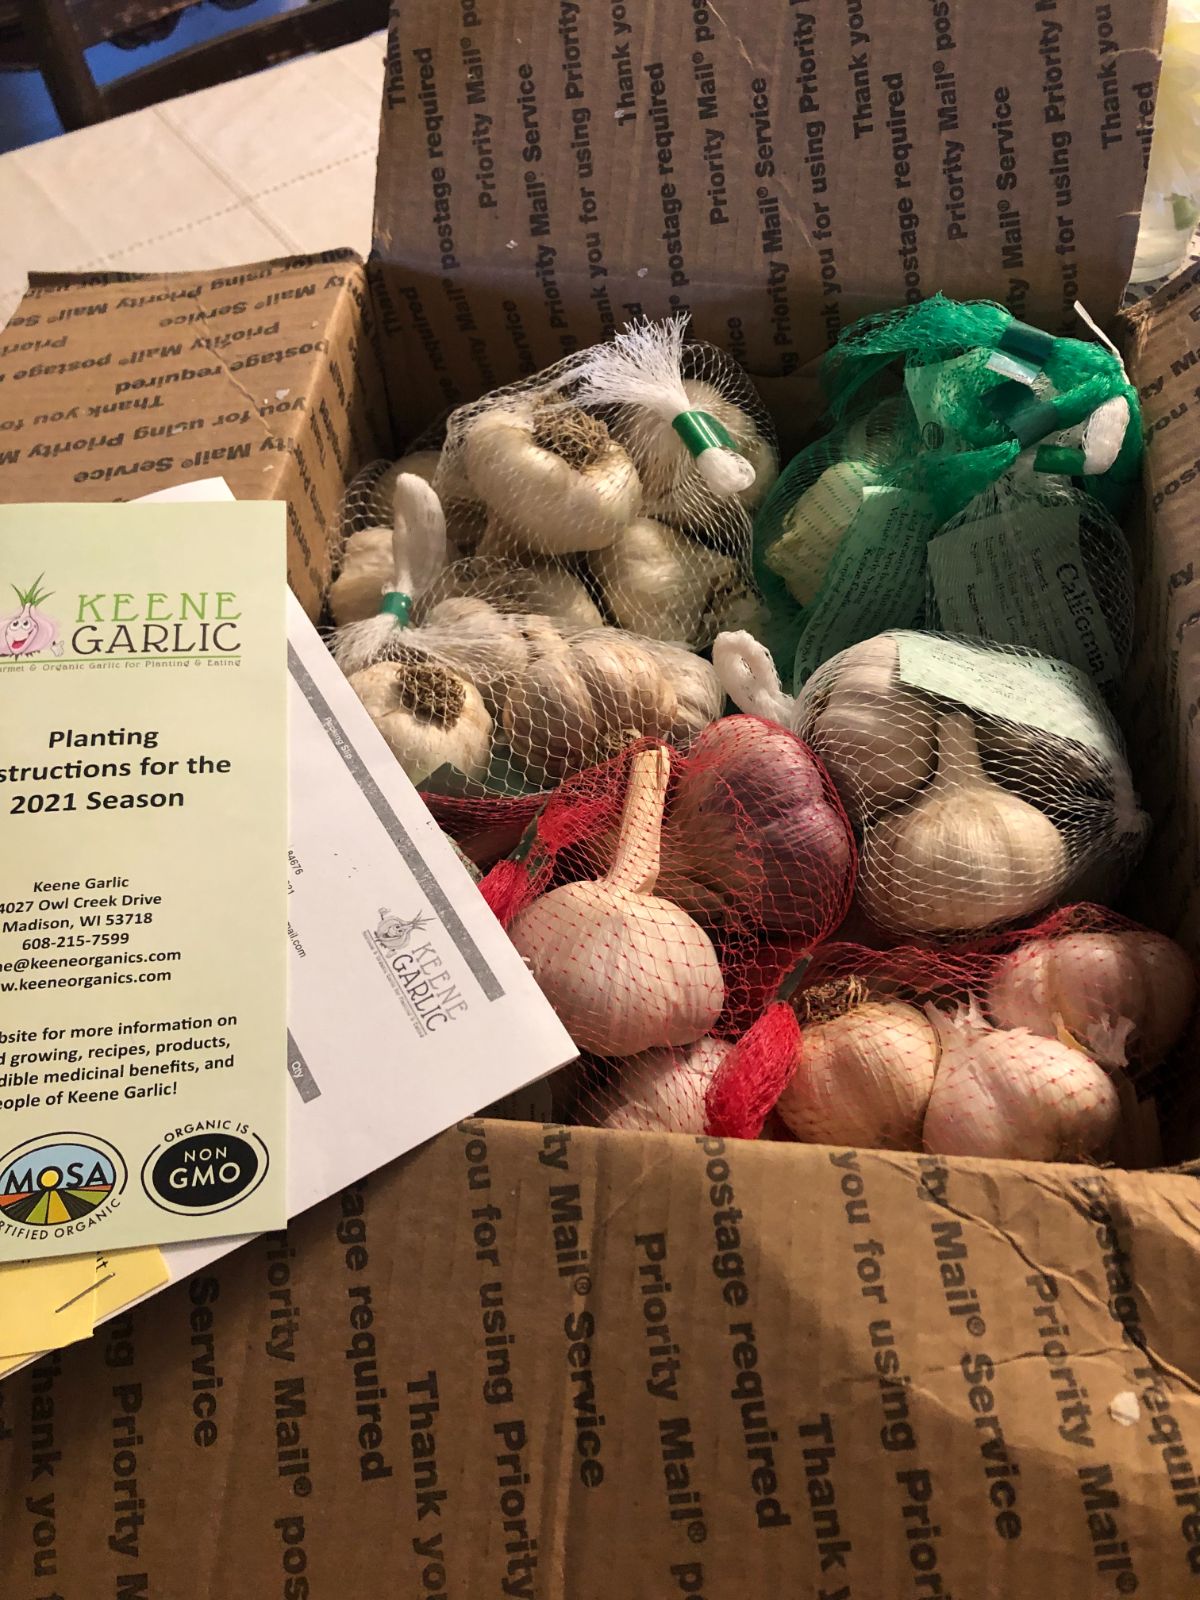 A boxed order of seed garlic from a garlic seed company